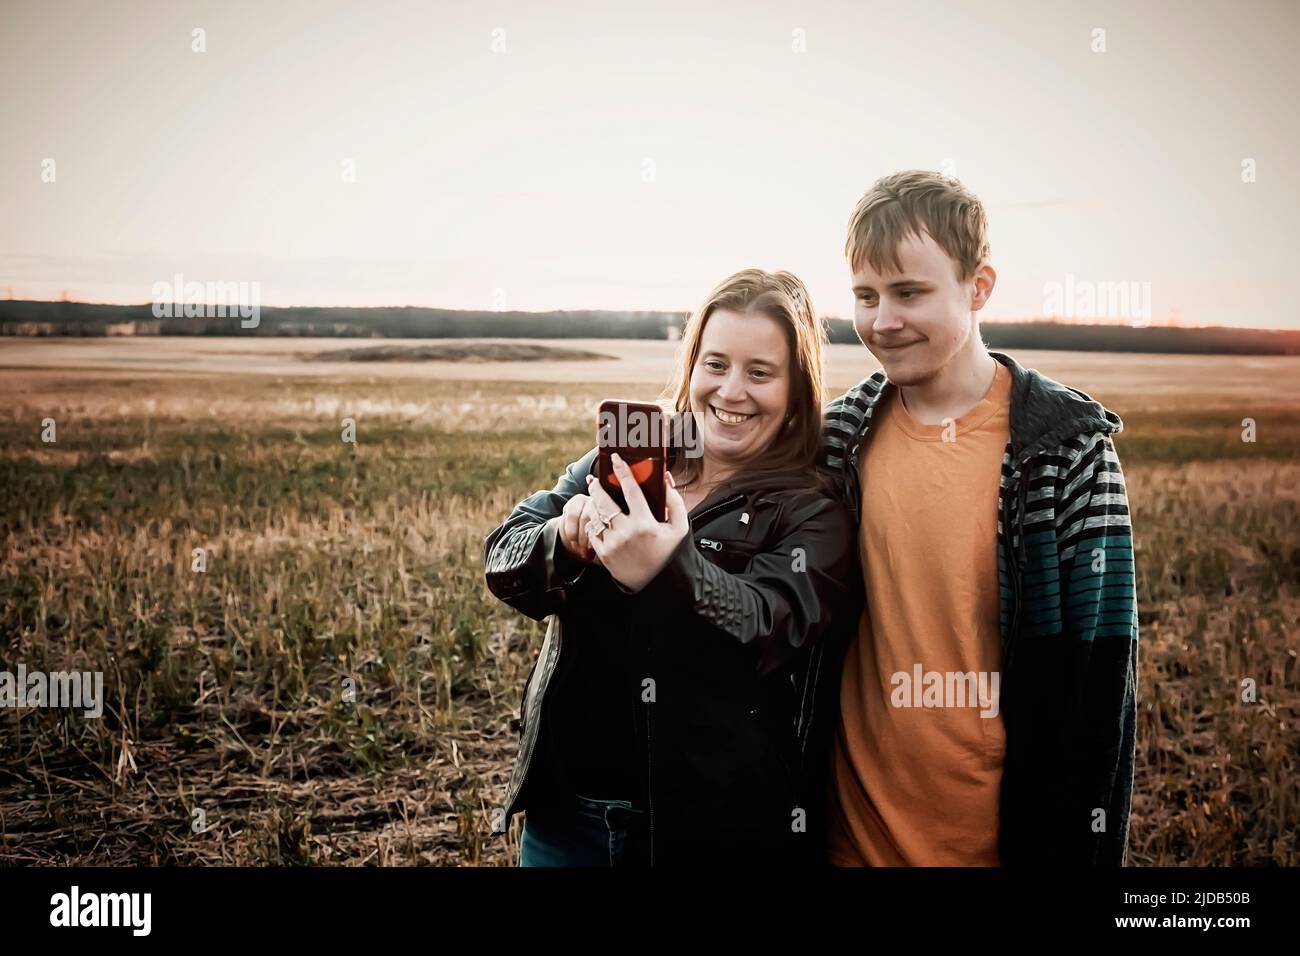 A mother with epilepsy taking a self-portrait with her son who has Aspberger Syndrome in a field on a farm after harvest; Westlock, Alberta, Canada Stock Photo